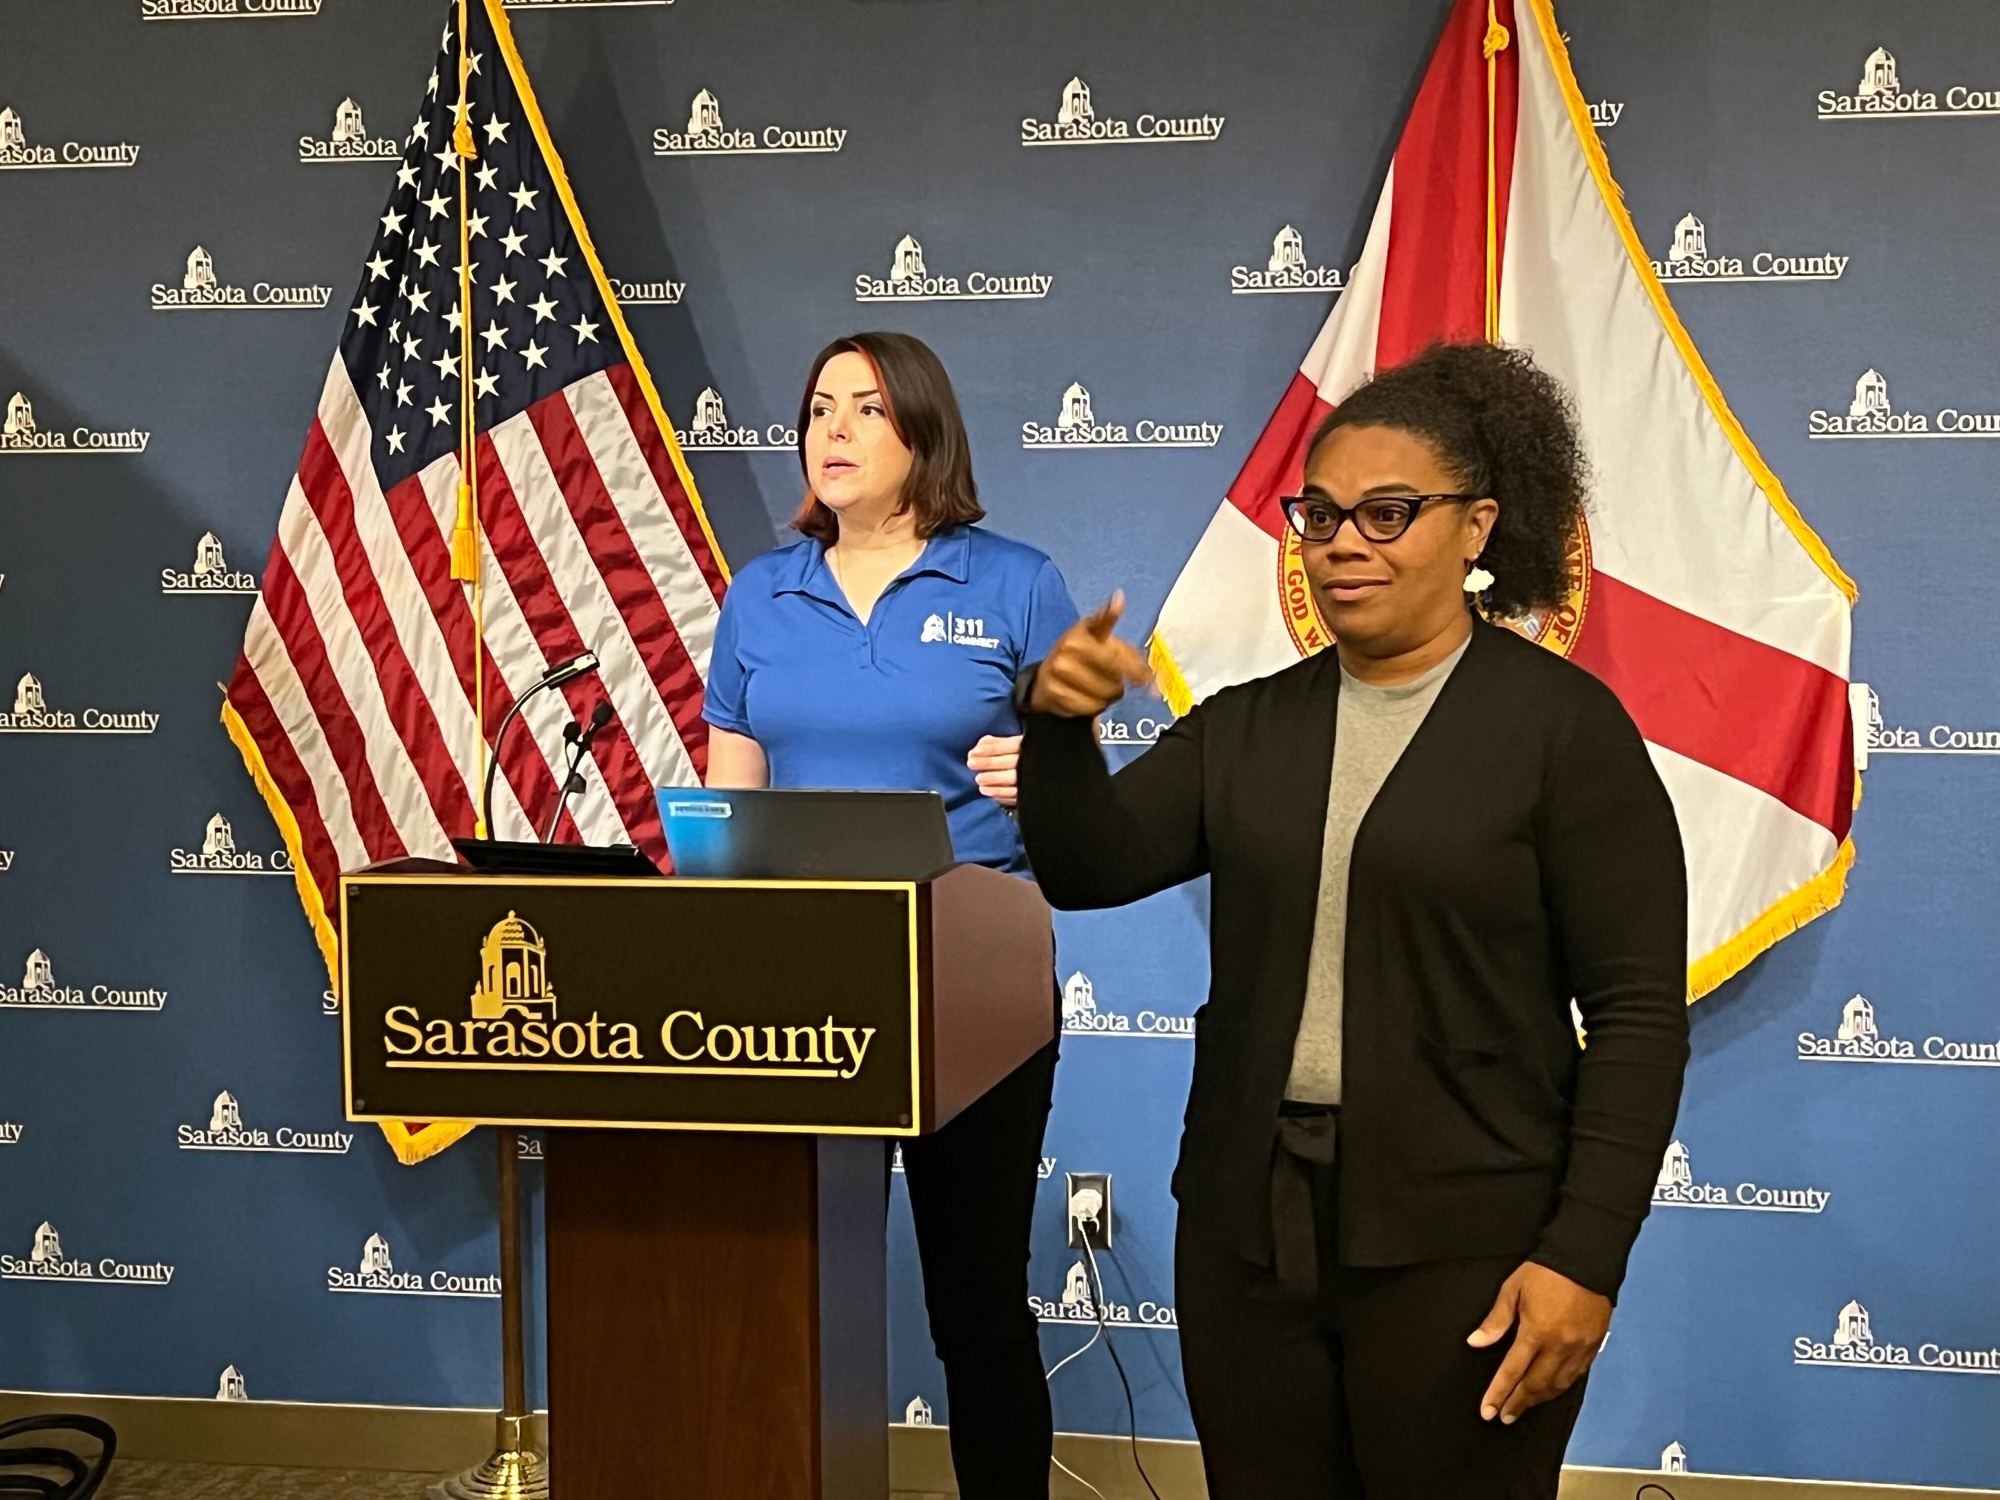 Jamie Carson, director of communications for Sarasota County, urges Zones A and B residents to leave before winds hit 45 mph. (Photo by Kaelyn Adix)